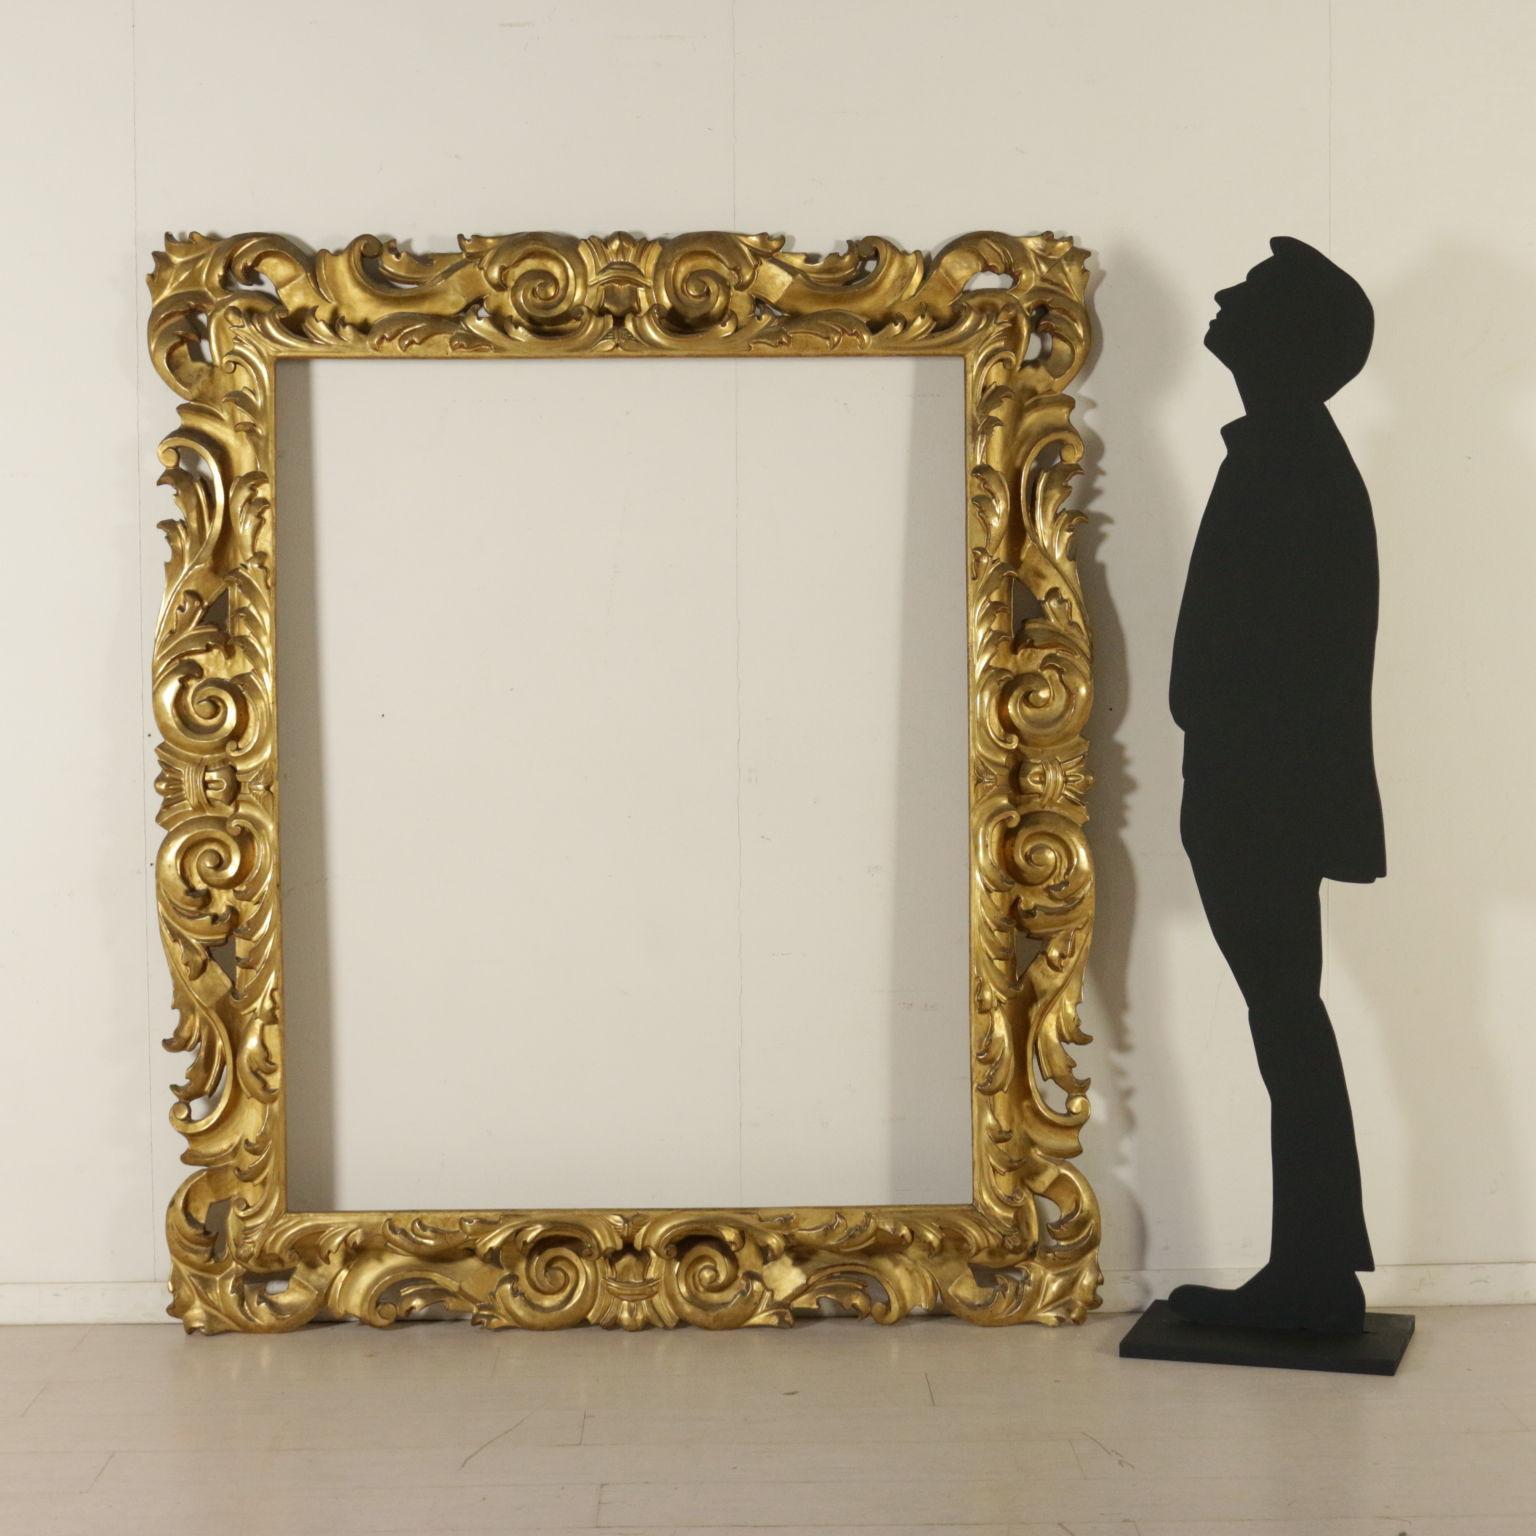 A large mirror, gilded and finely carved. Two orders of frames, volute and leaf carvings with perforations. Manufactured in Italy, 17th century.